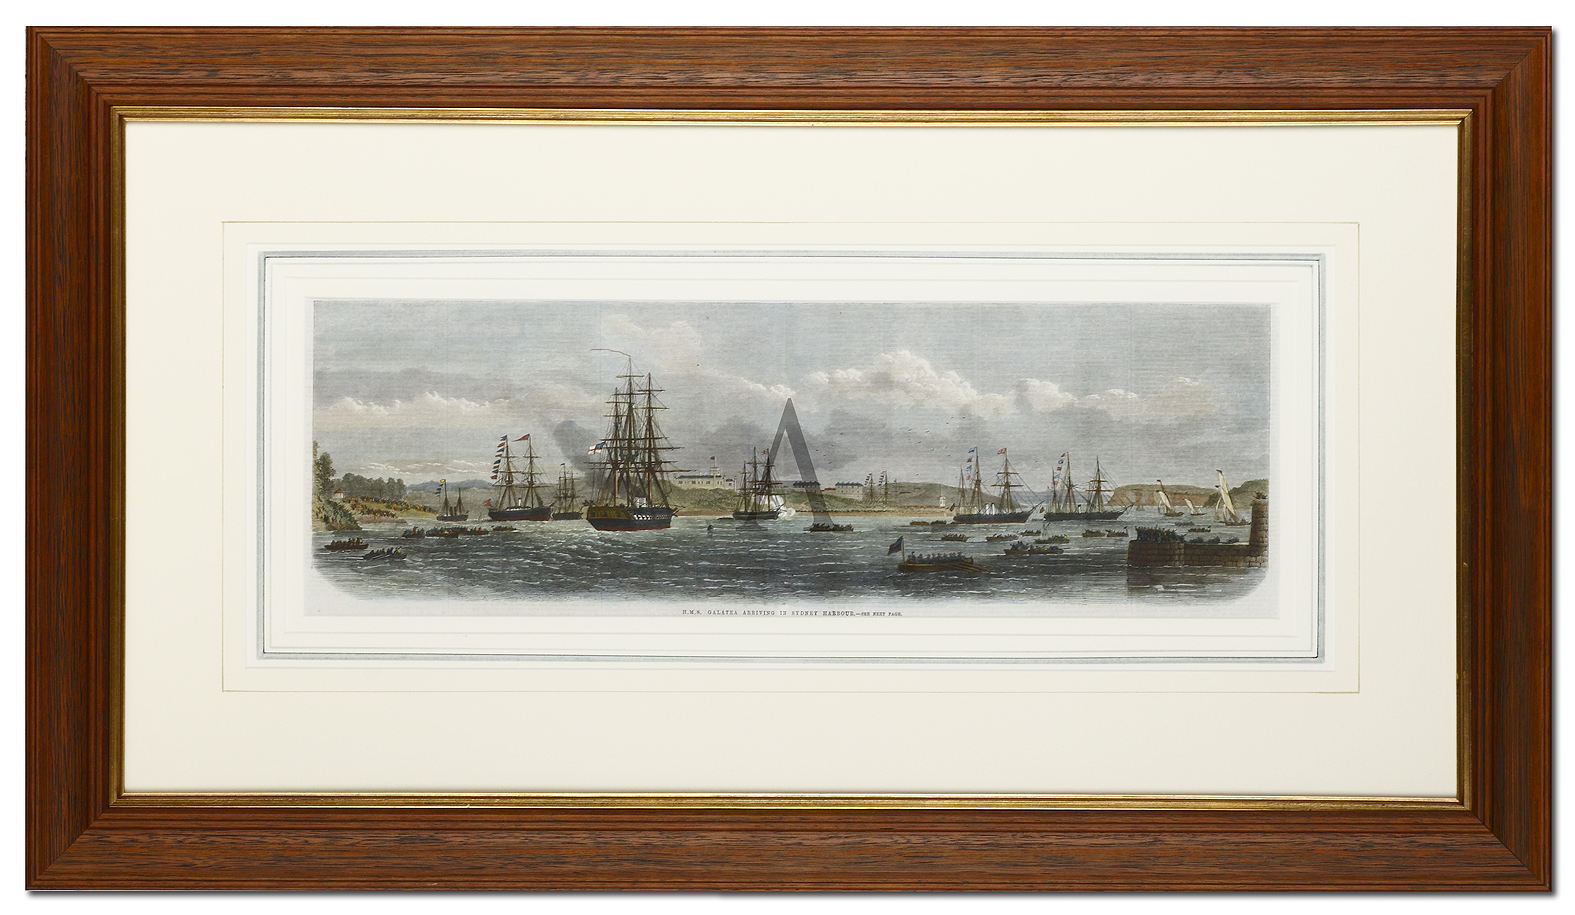 H.M.S. Galatea Arriving in Sydney Harbour - Antique View from 1868